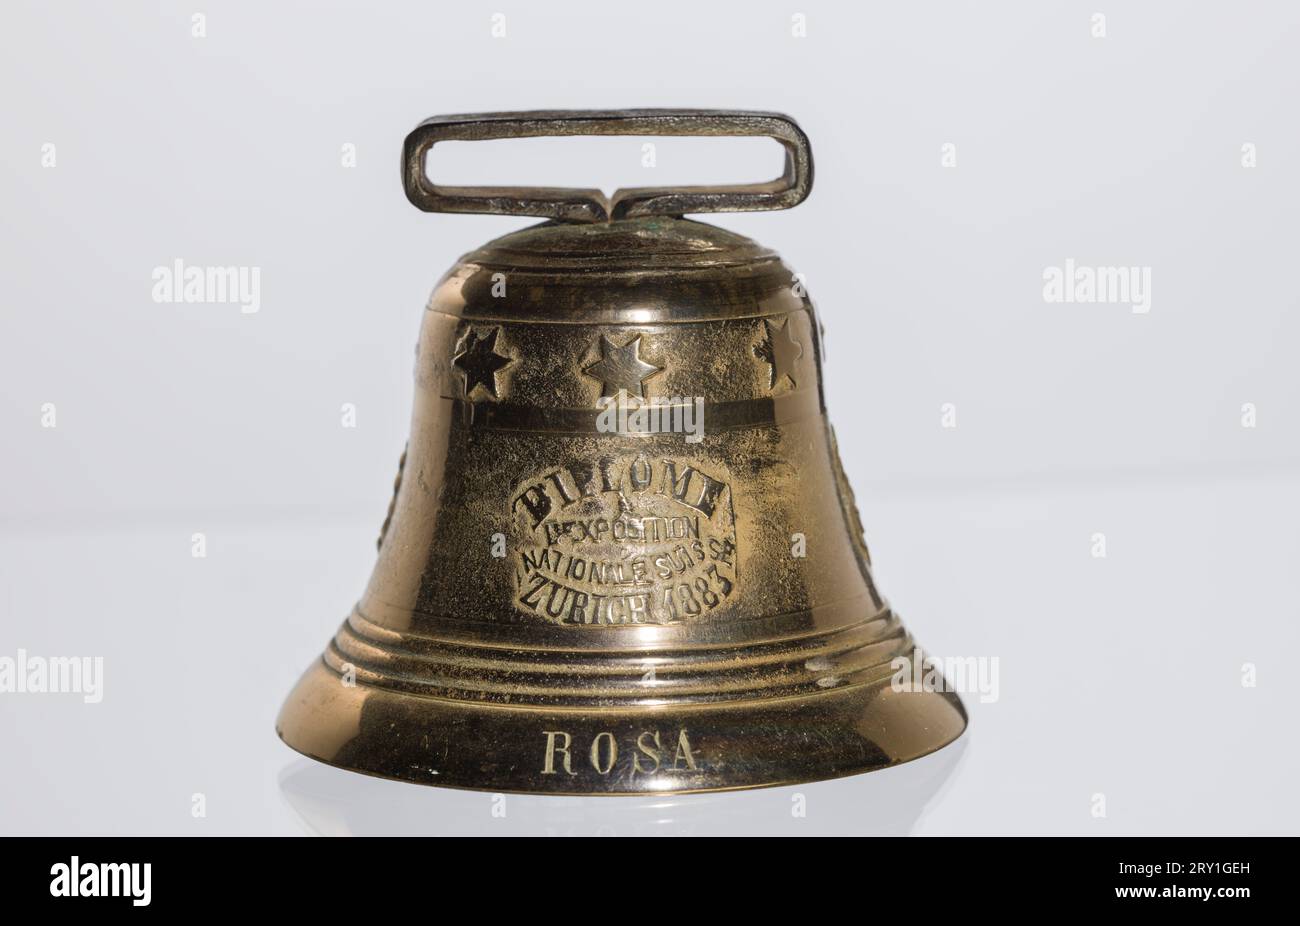 Commemorative bell from the 1883 Swiss National Exhibition 1883 Stock Photo